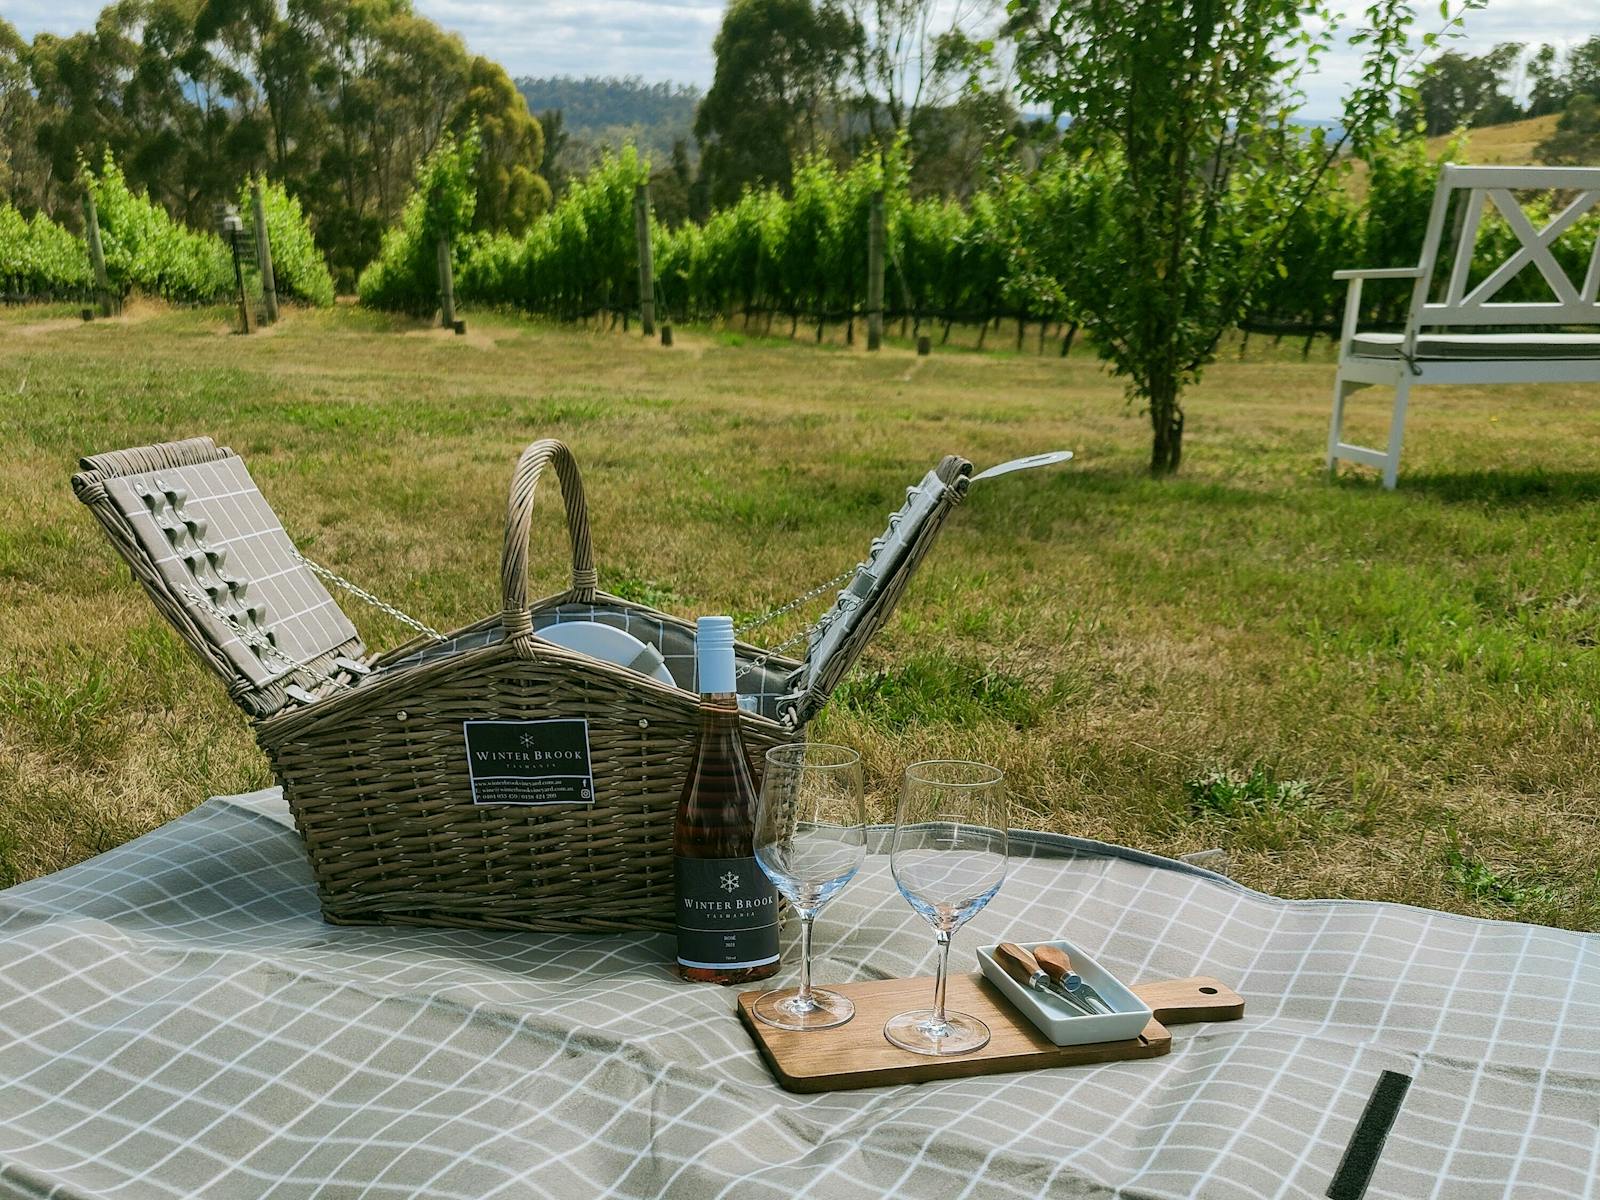 Join us in the Vineyard for picnic